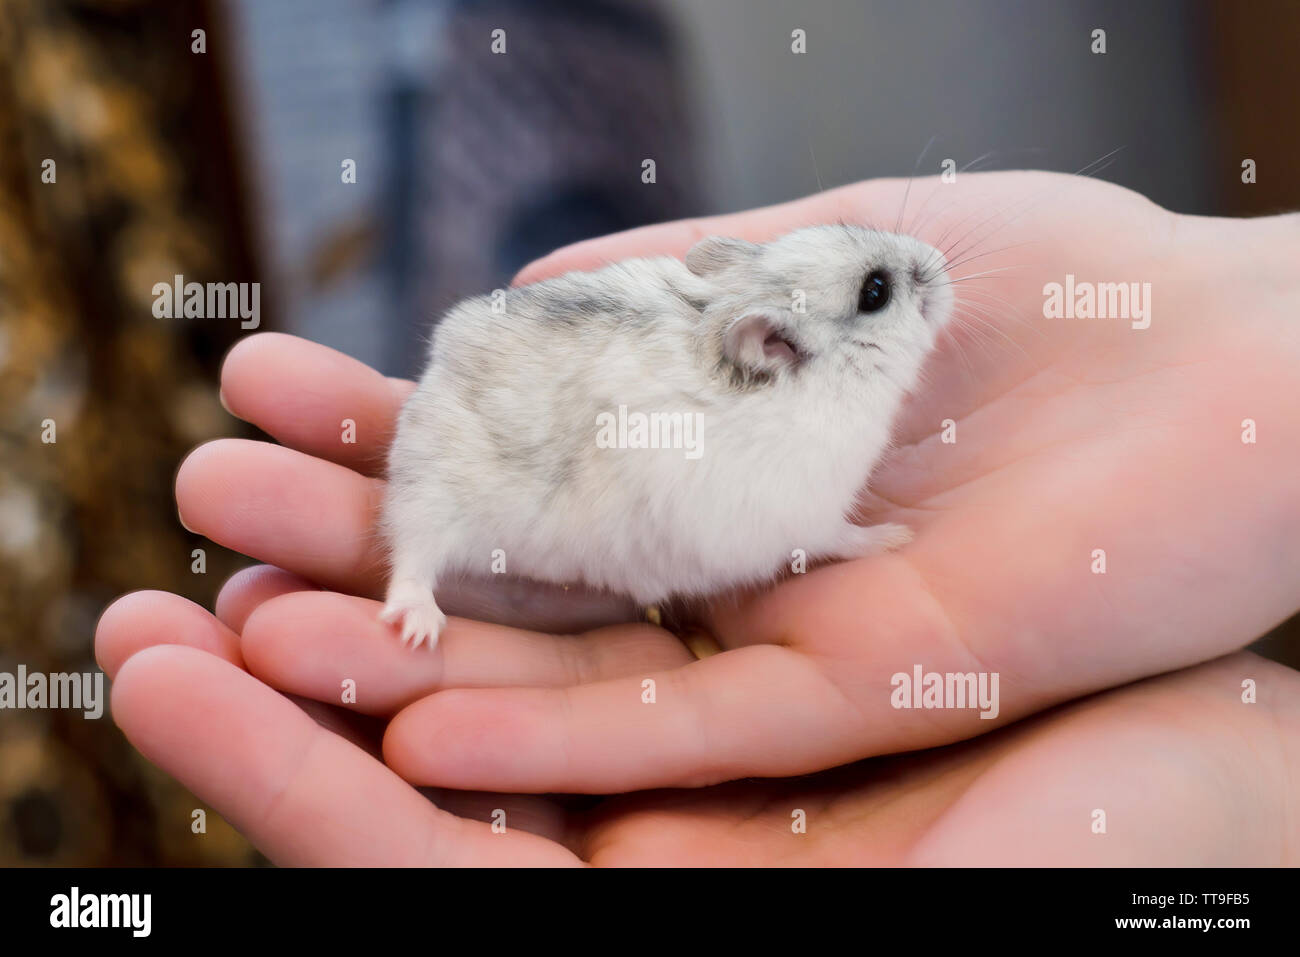 Little gray fluffy hamster sitting in the palm of your hand Stock Photo